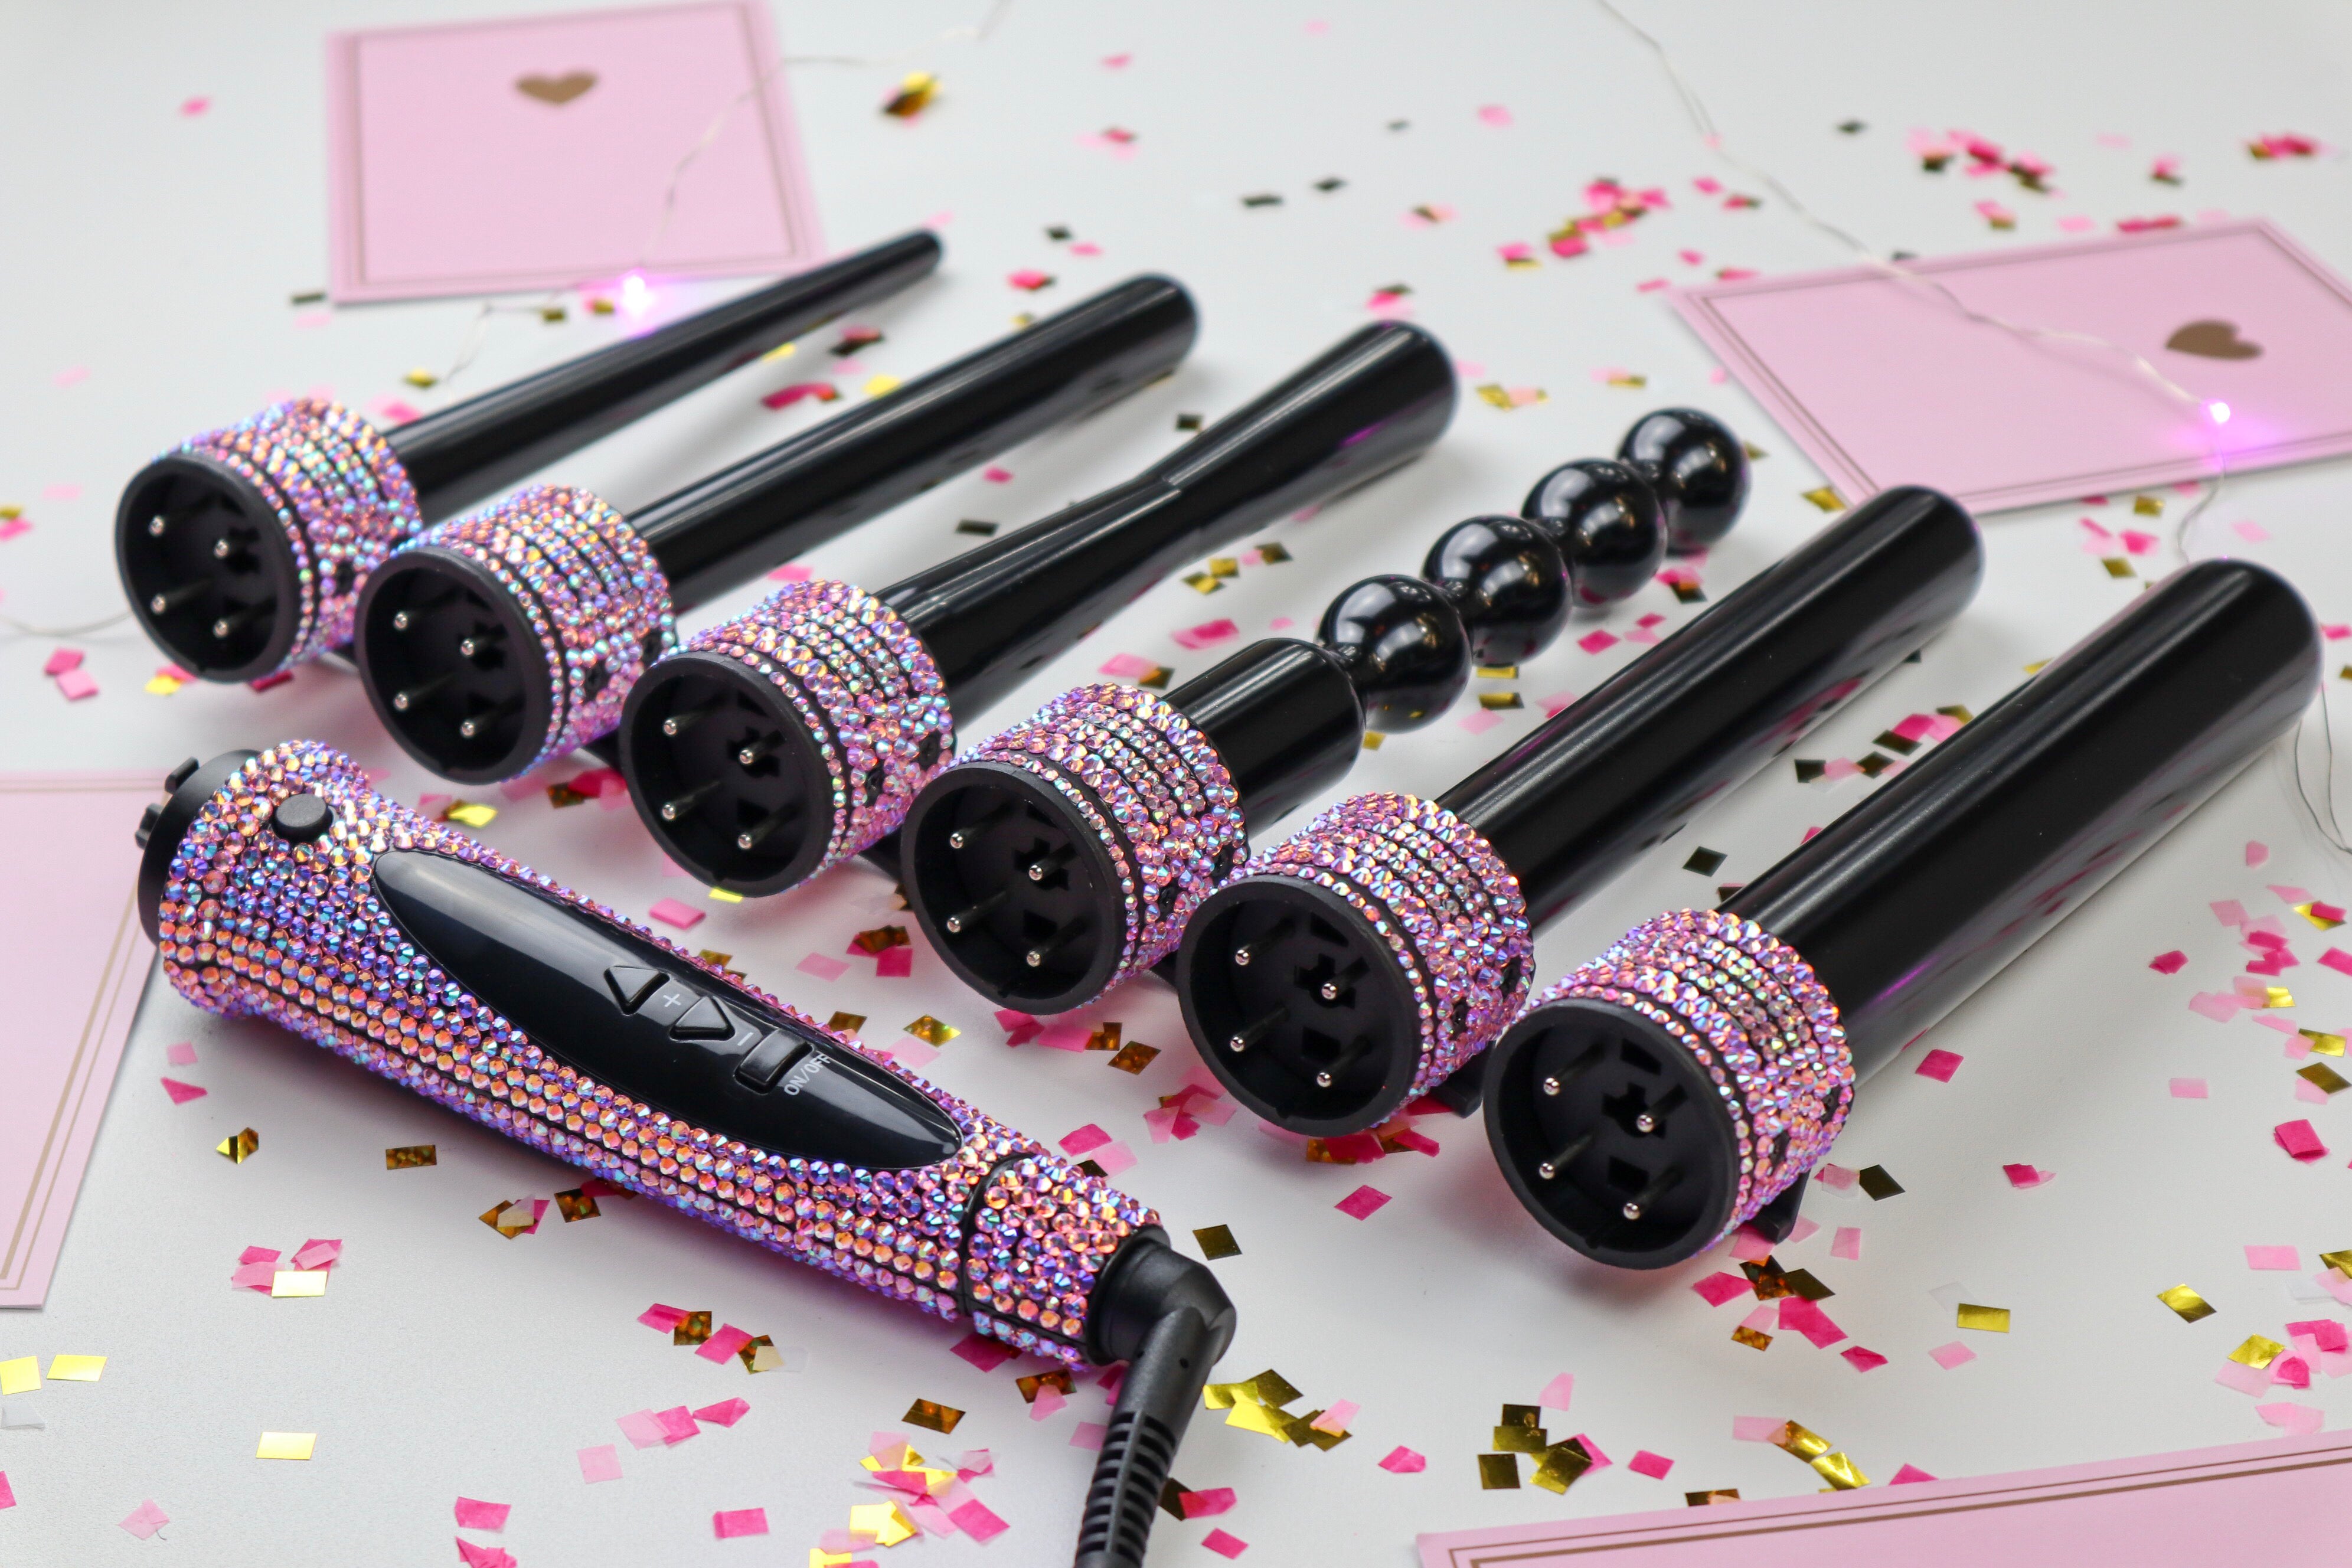 Crystallized 6 in 1 Ceramic Curling Wand